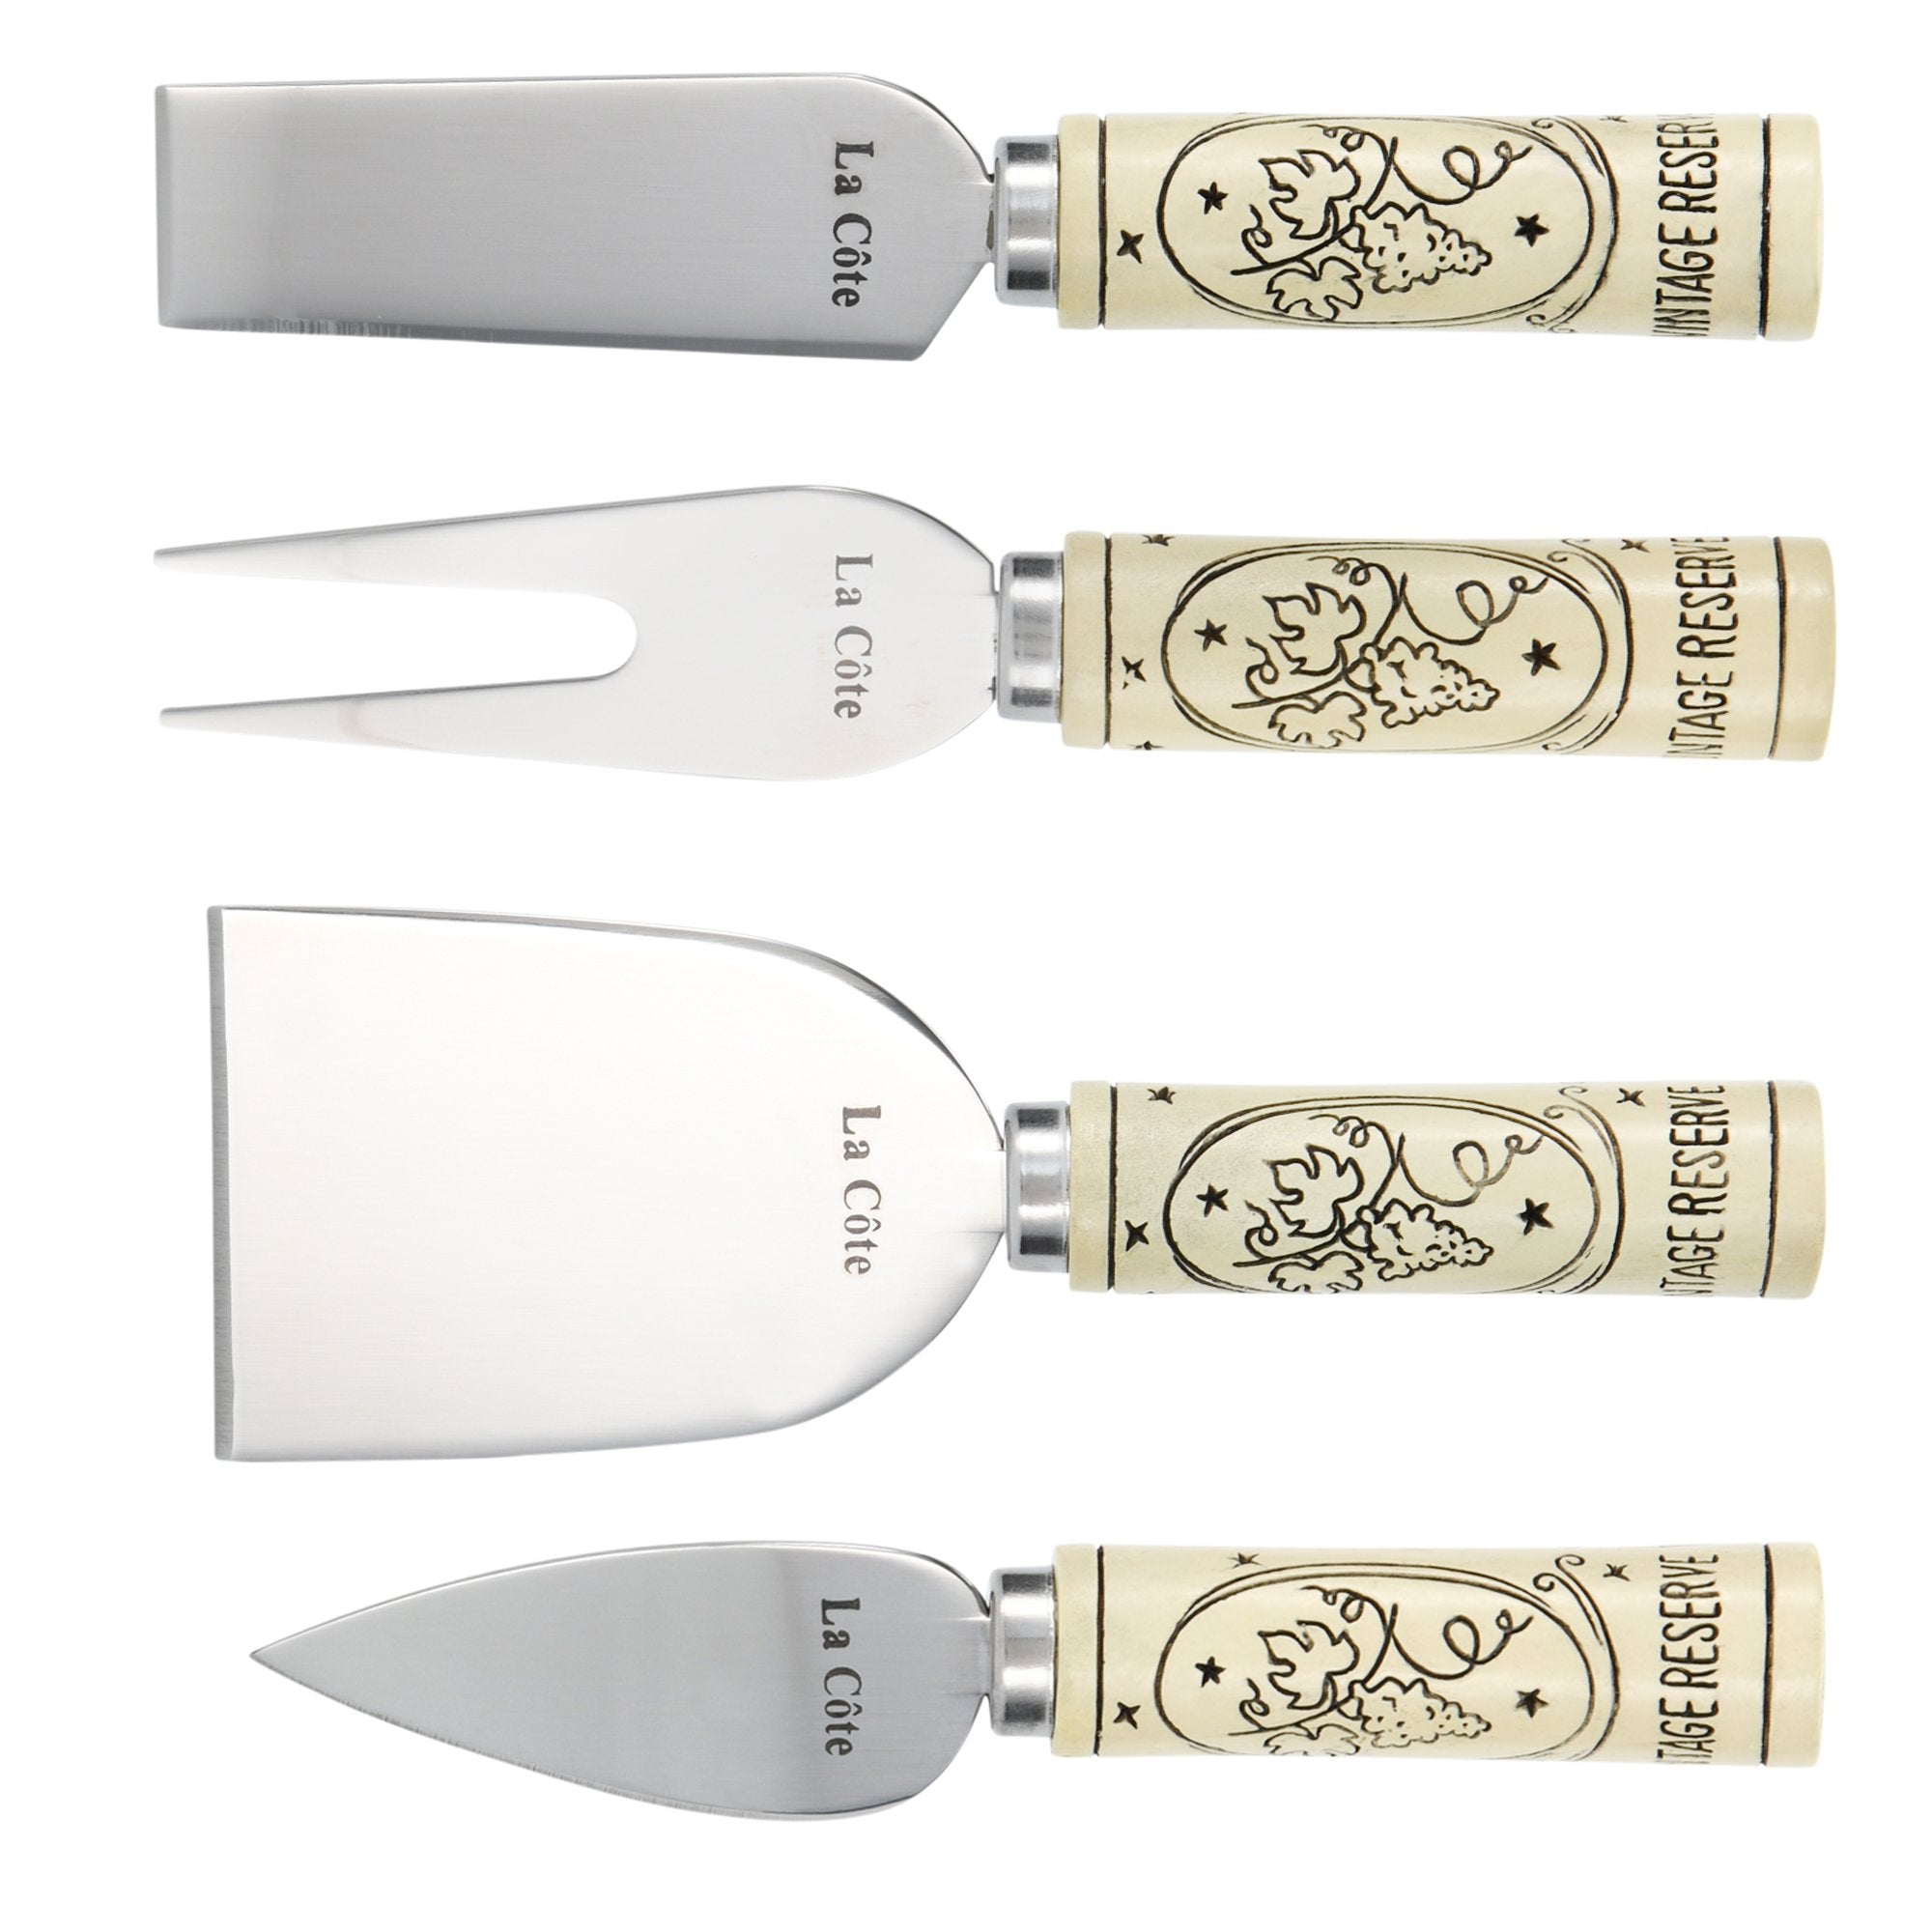 La Cote 4 piece Cheese Knife Set in Gift Box